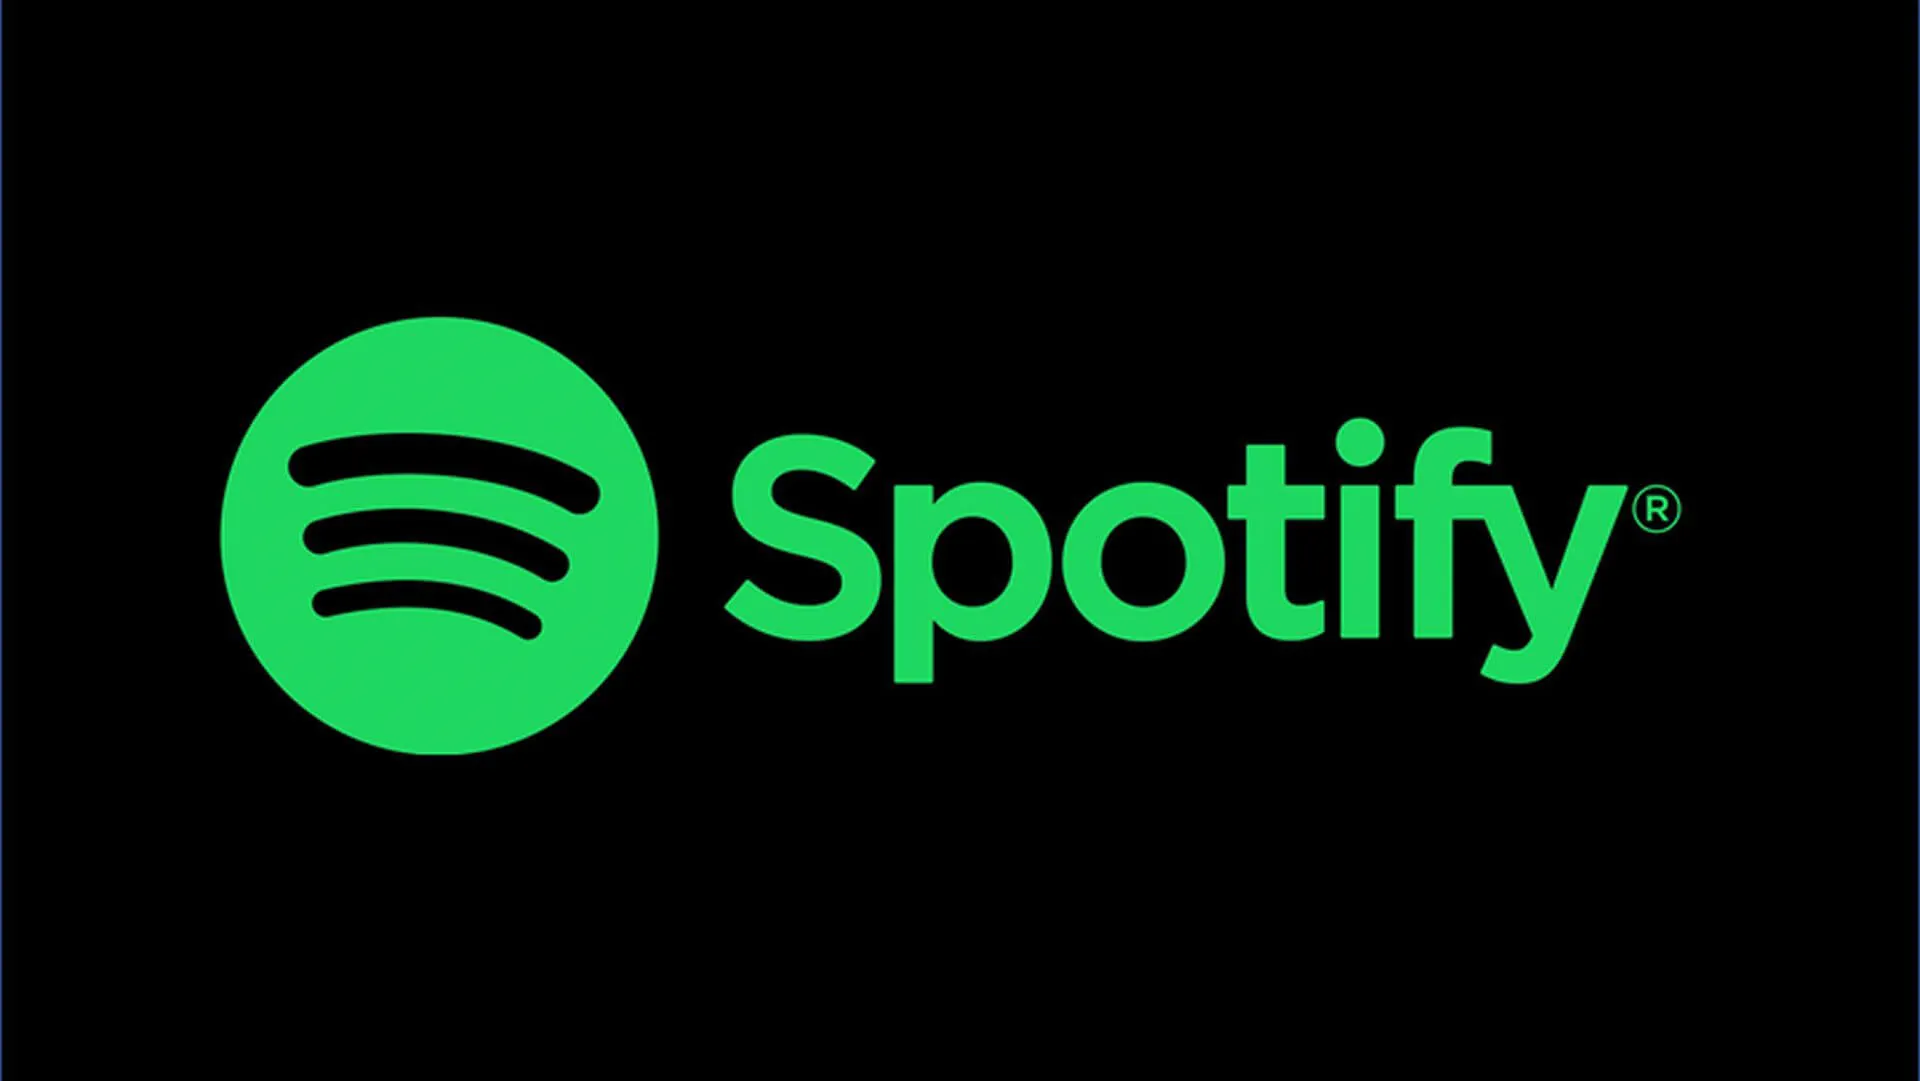 Spotify Technology Sa spot Announces Layoffs 200 Jobs to Be Cut in Podcast Unit Transformation